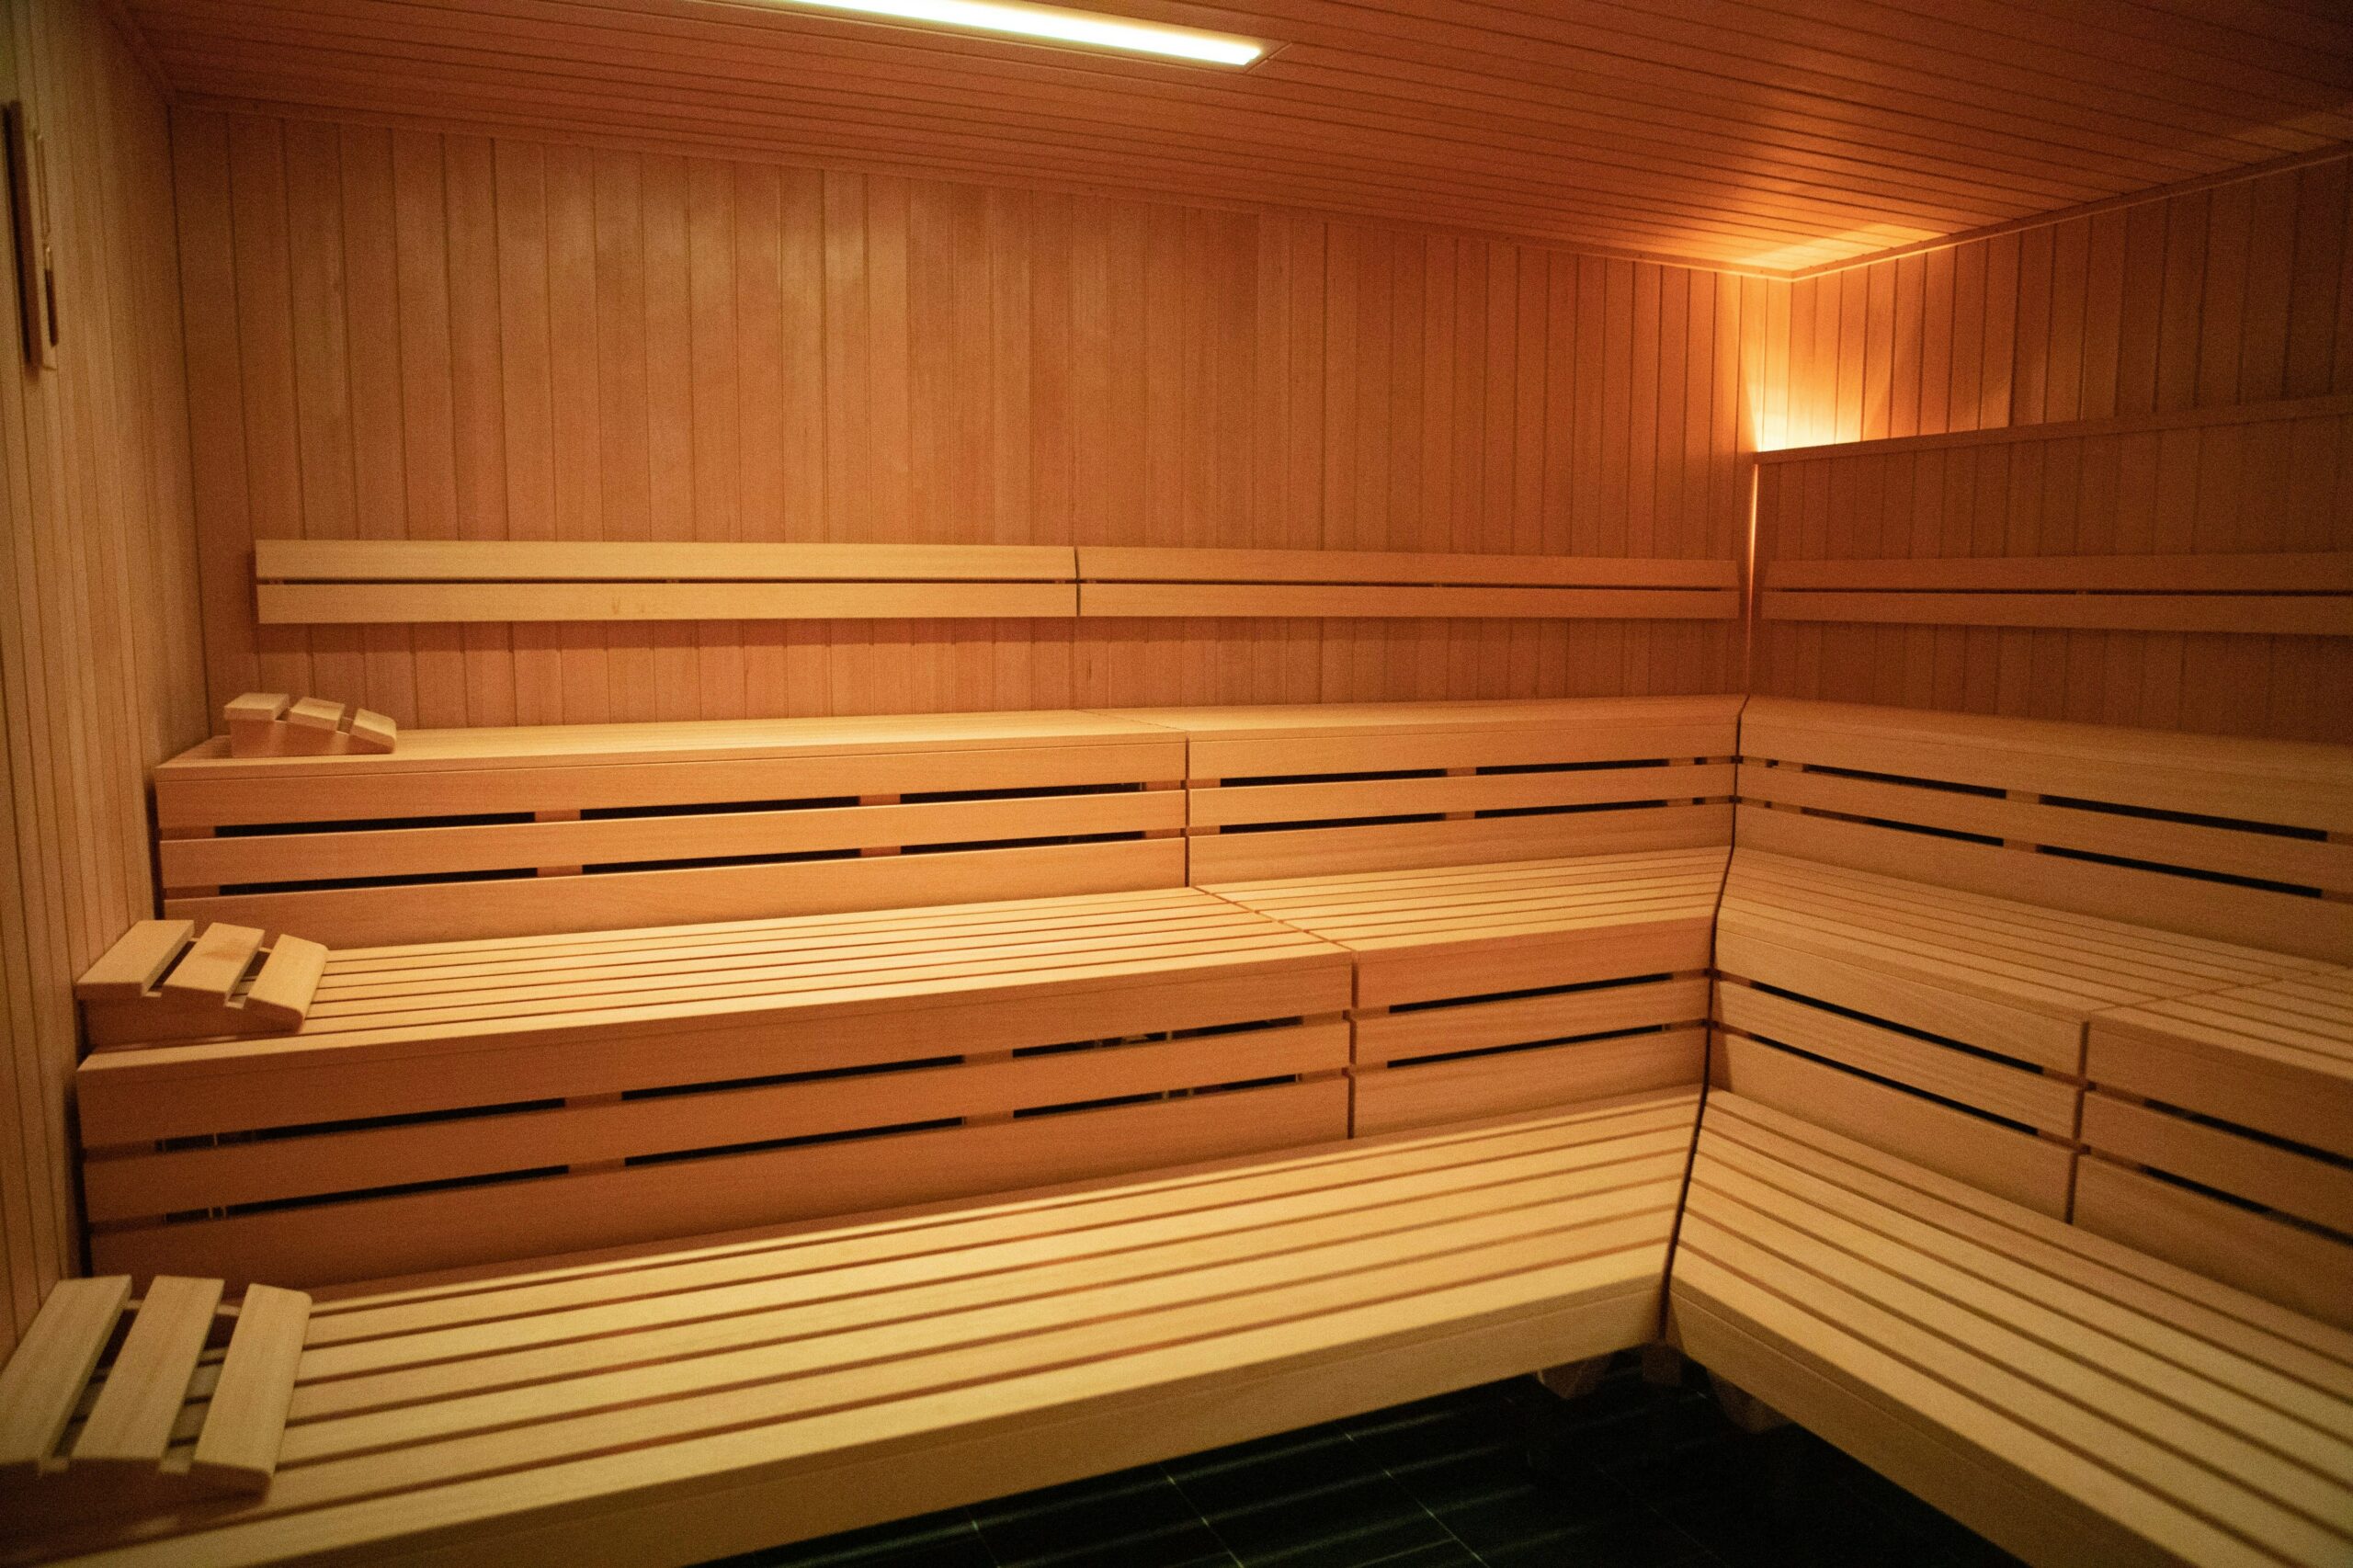 Dry Sauna For Health & Weight Loss